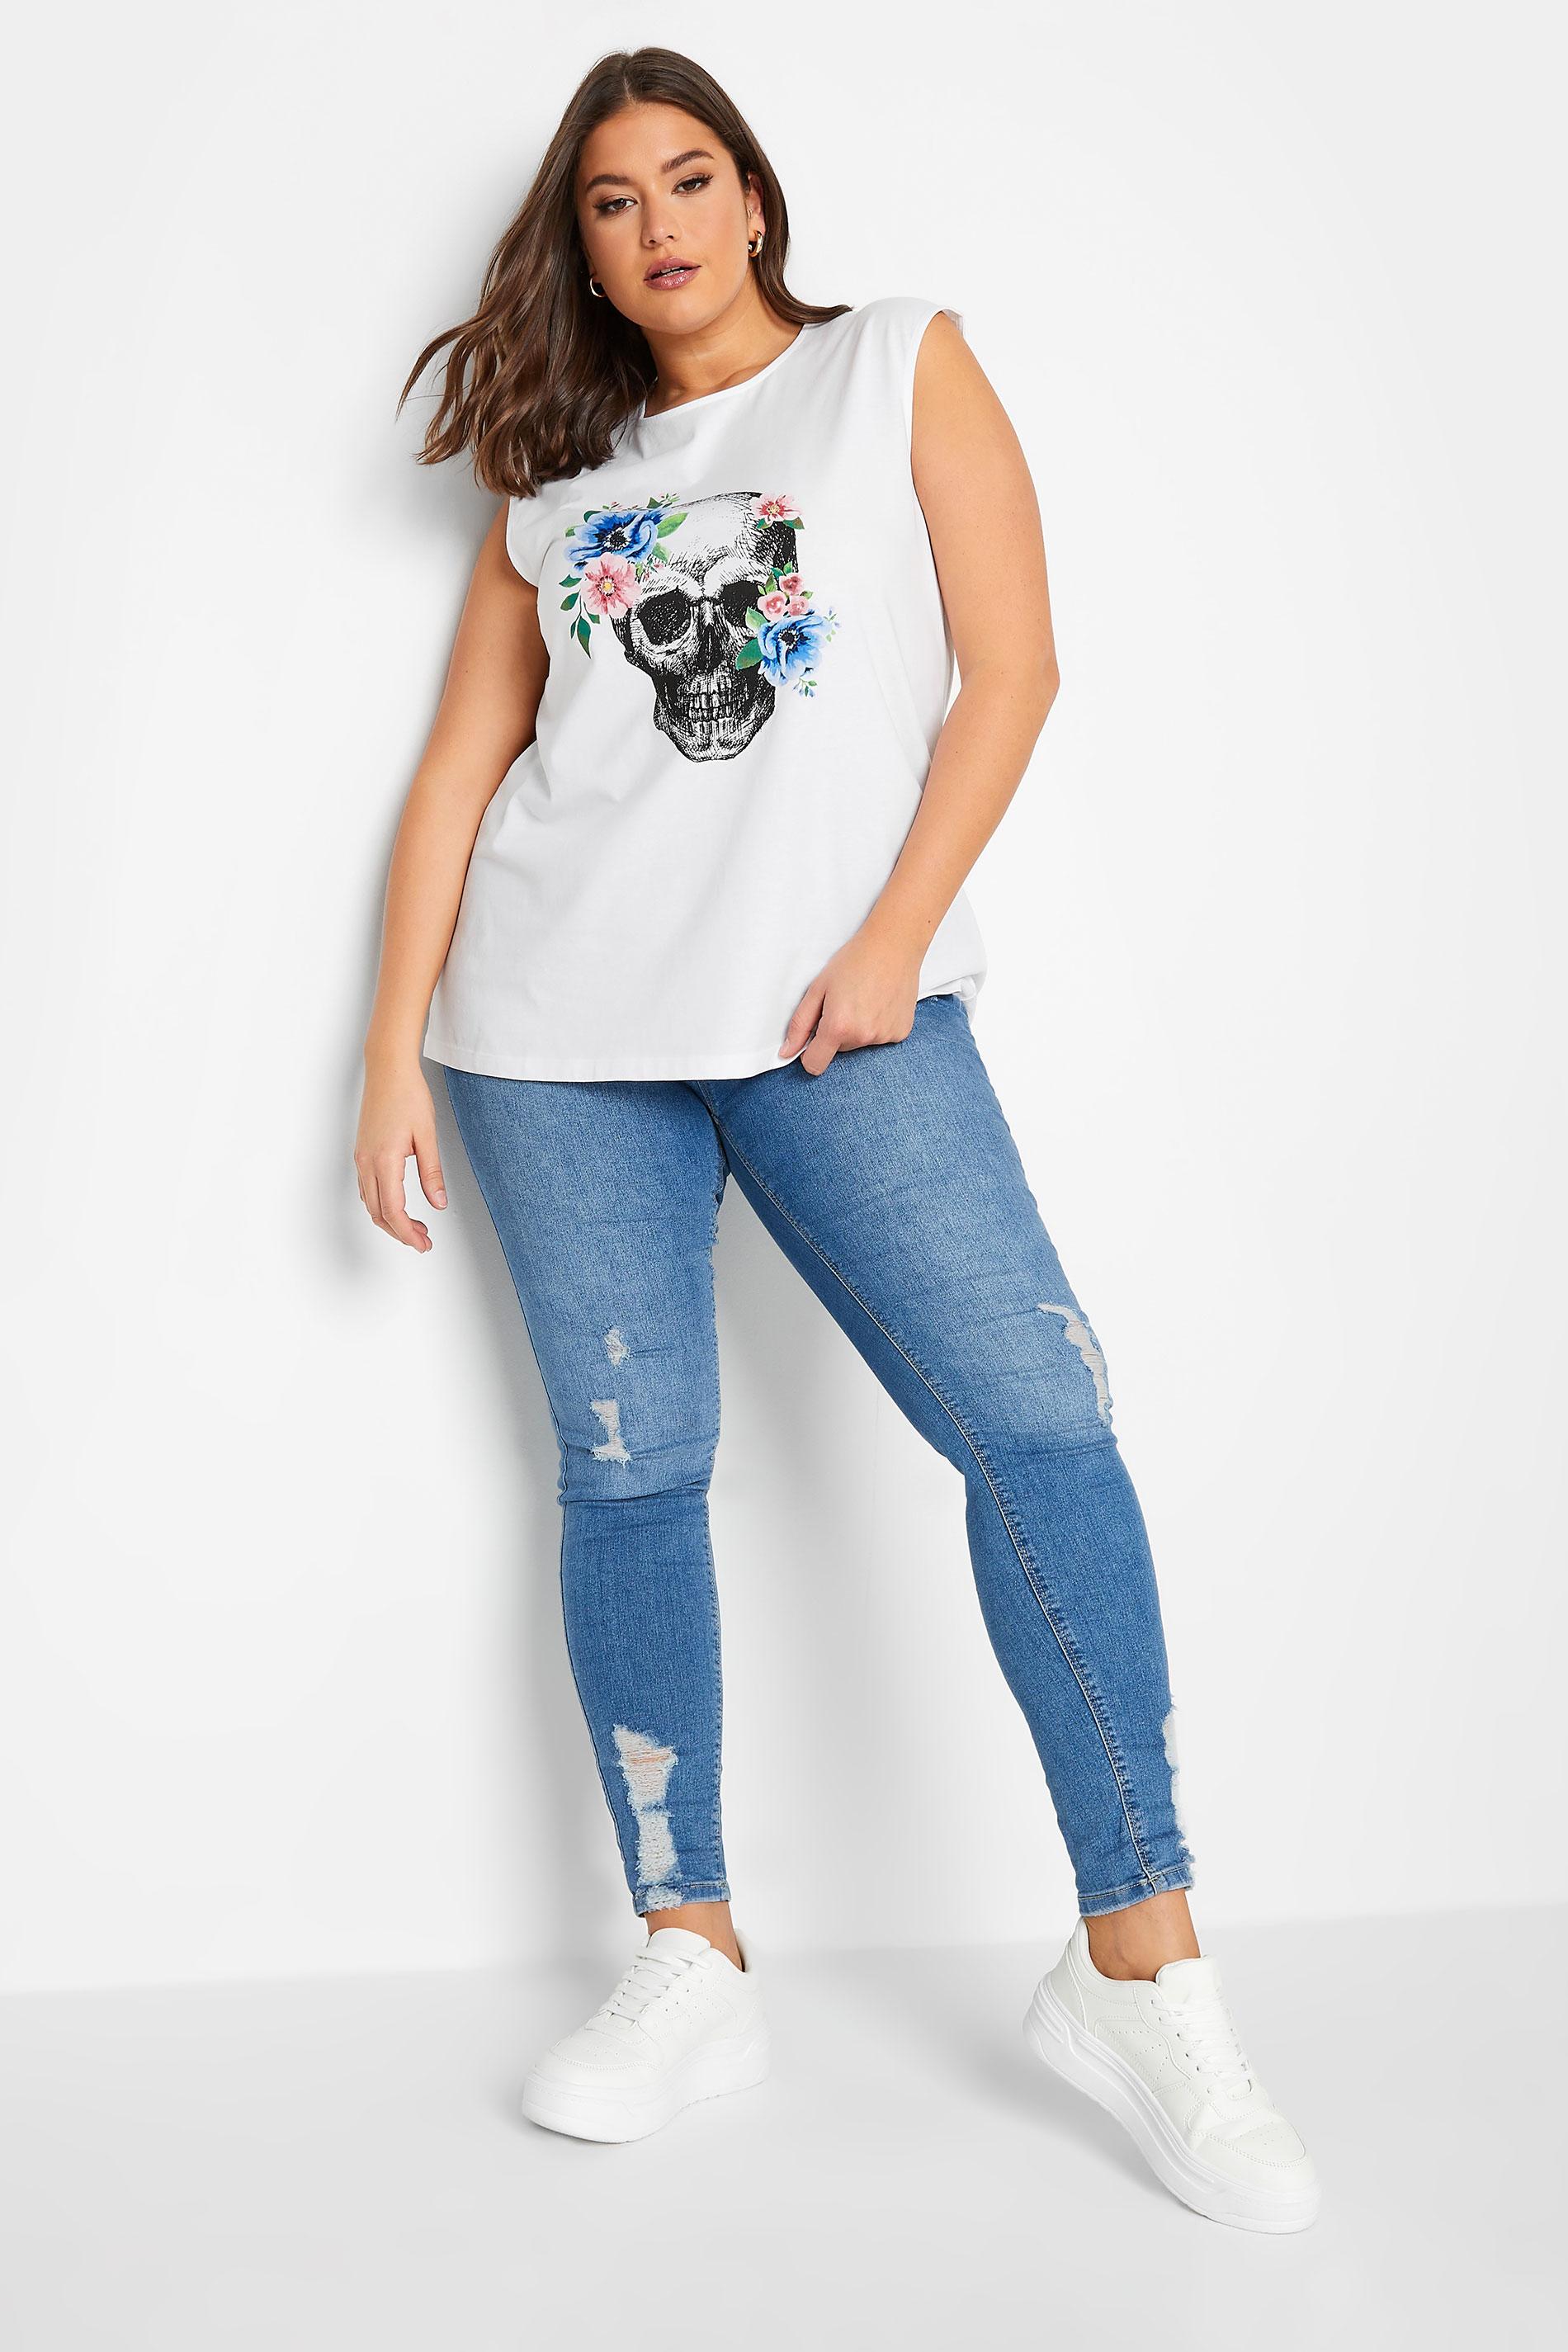 YOURS Plus Size White Floral Skull Print Vest Top | Yours Clothing 2